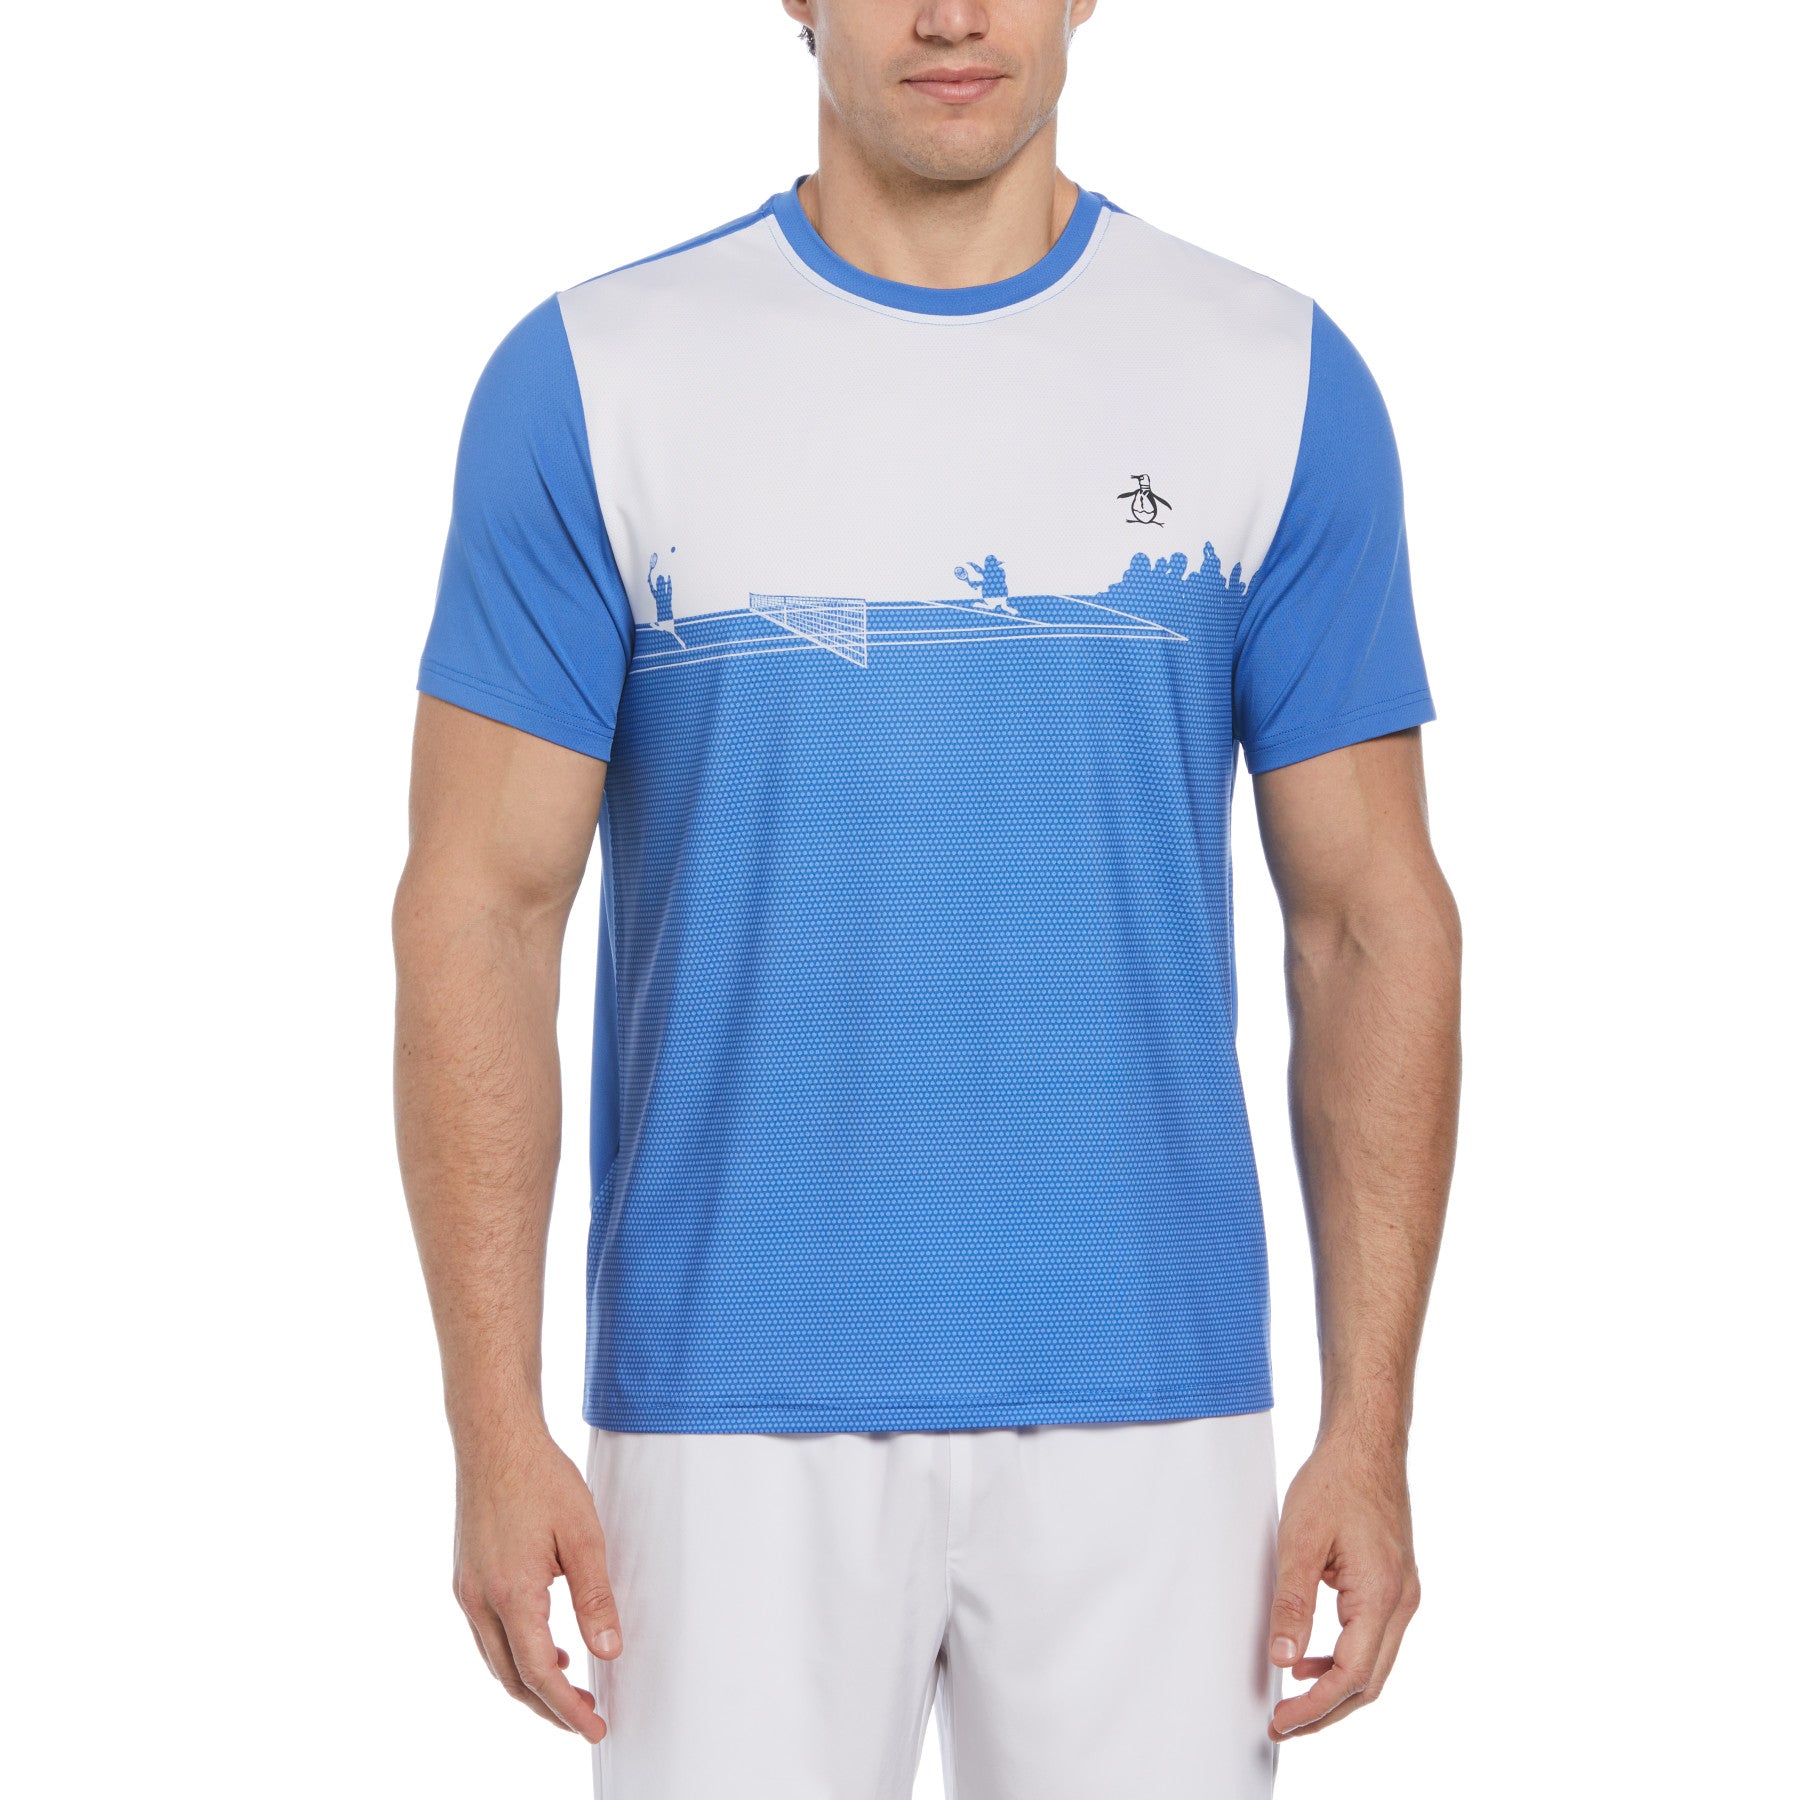 View Outlined Pete Performance Short Sleeve Tennis TShirt In Nebulas information